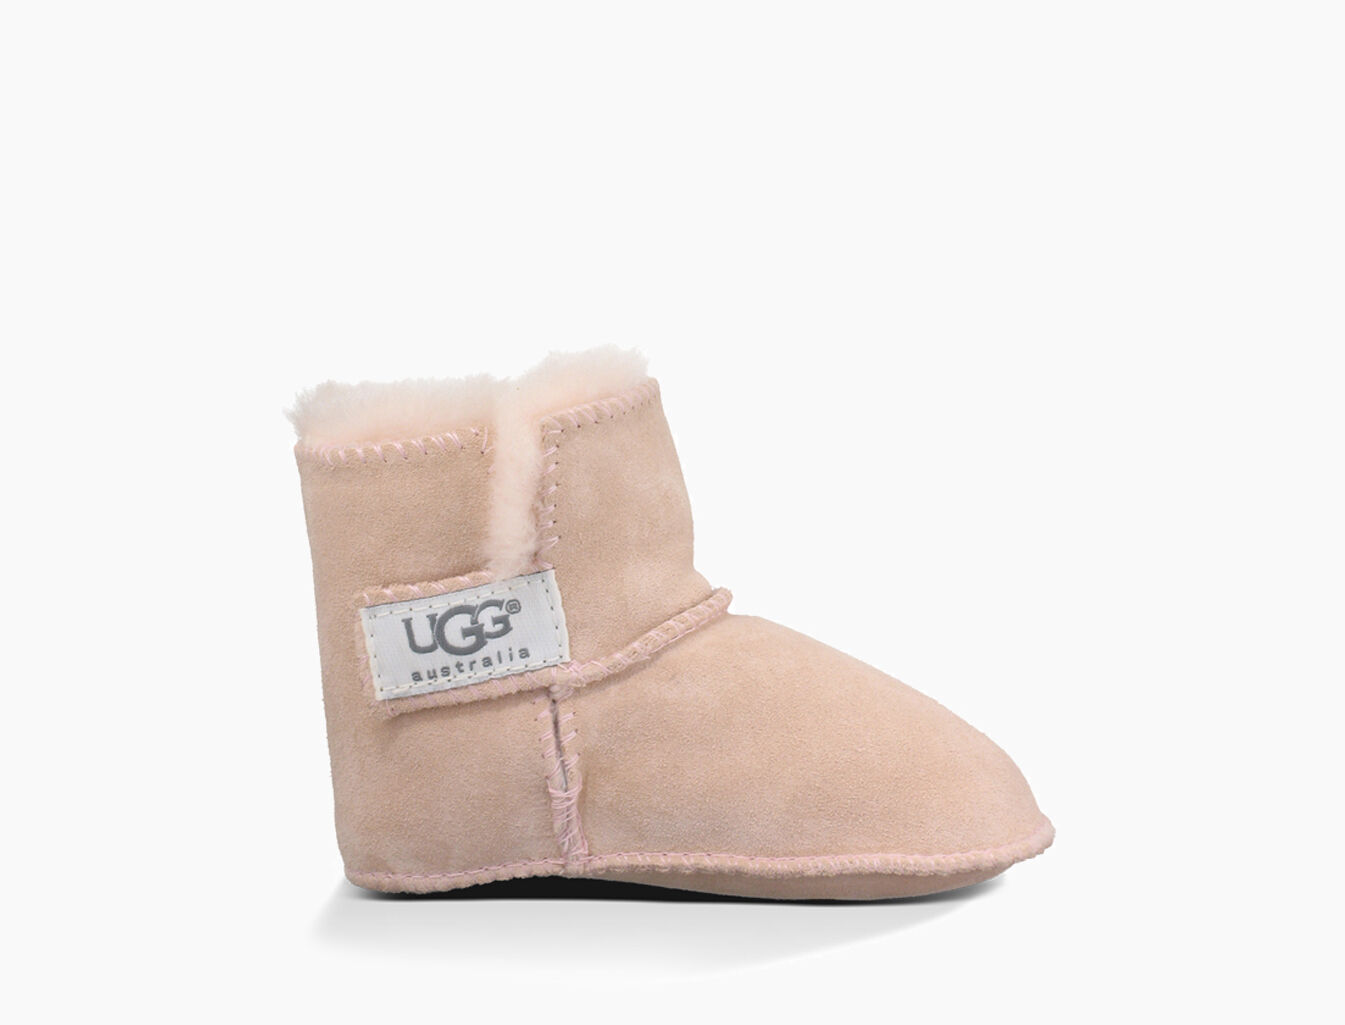 kids uggs size 4